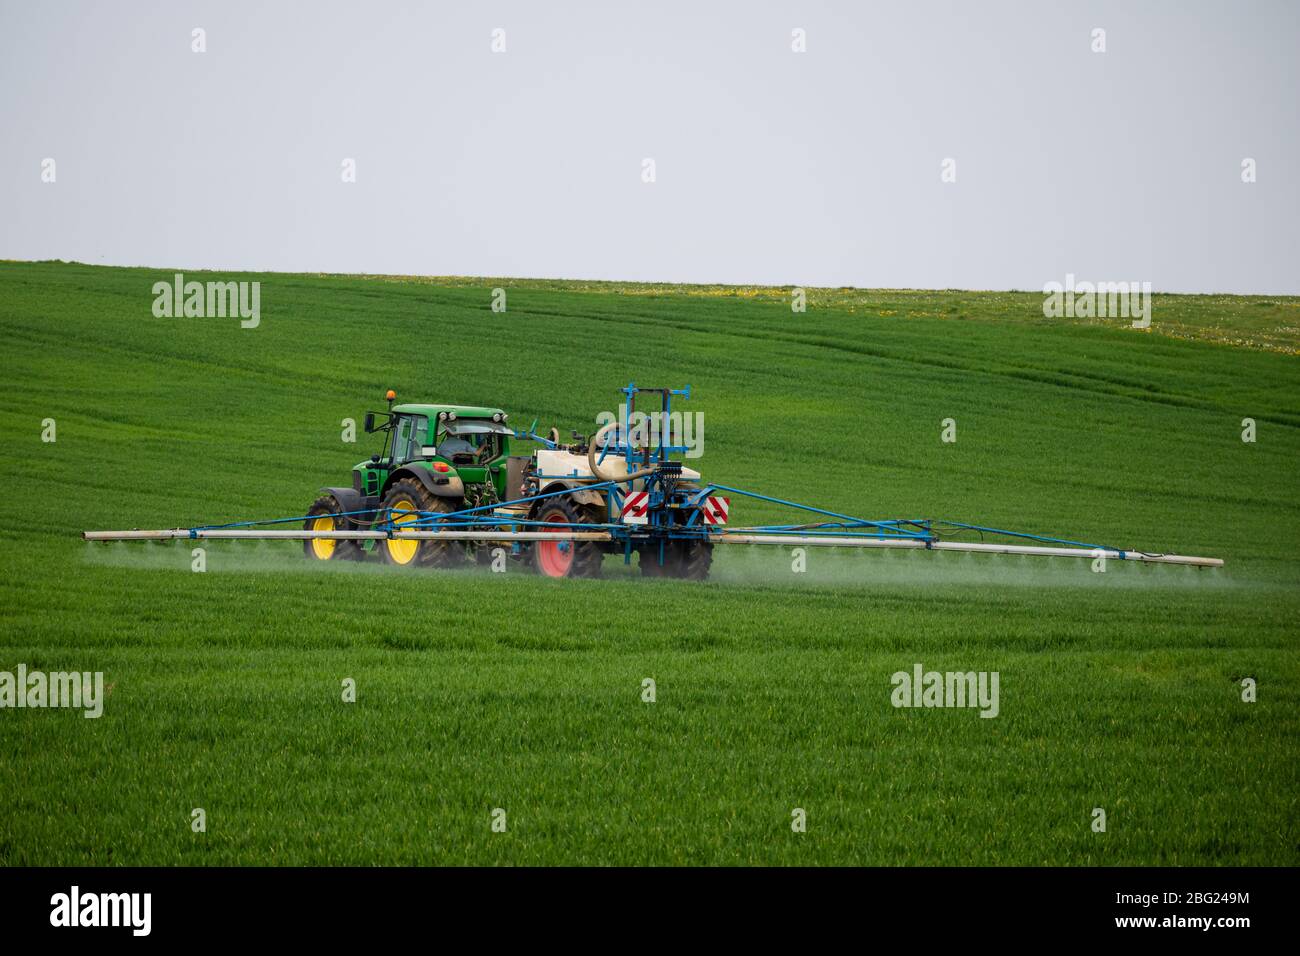 Tractor with trailed sprayer apply herbicides, pesticides or fertilizers on agricultural crops Stock Photo